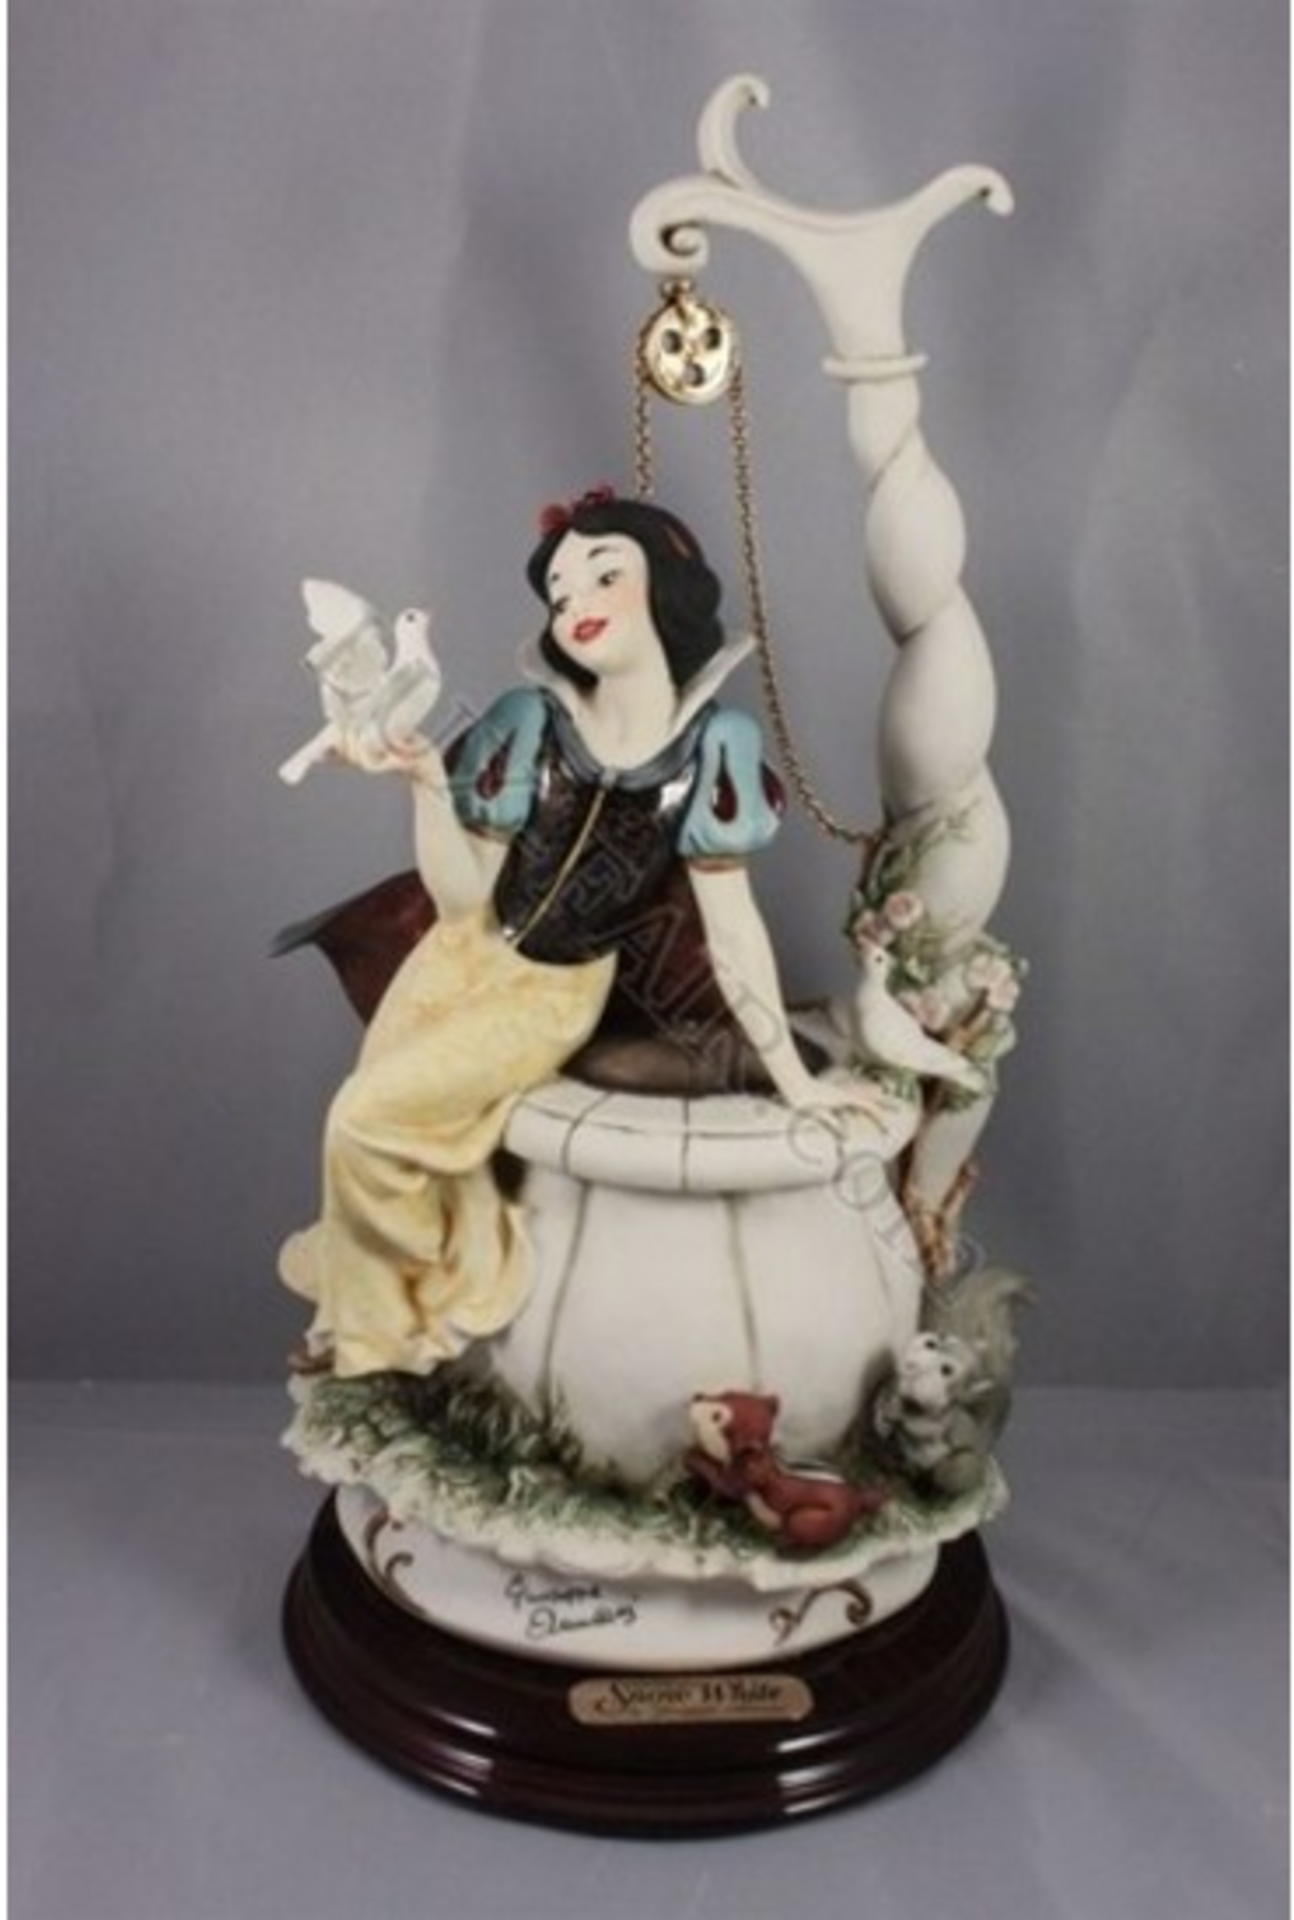 GIUSEPPE ARMANI COLLECTIBLE - SNOW WHITE AT THE WISHING WELL - #0199-C